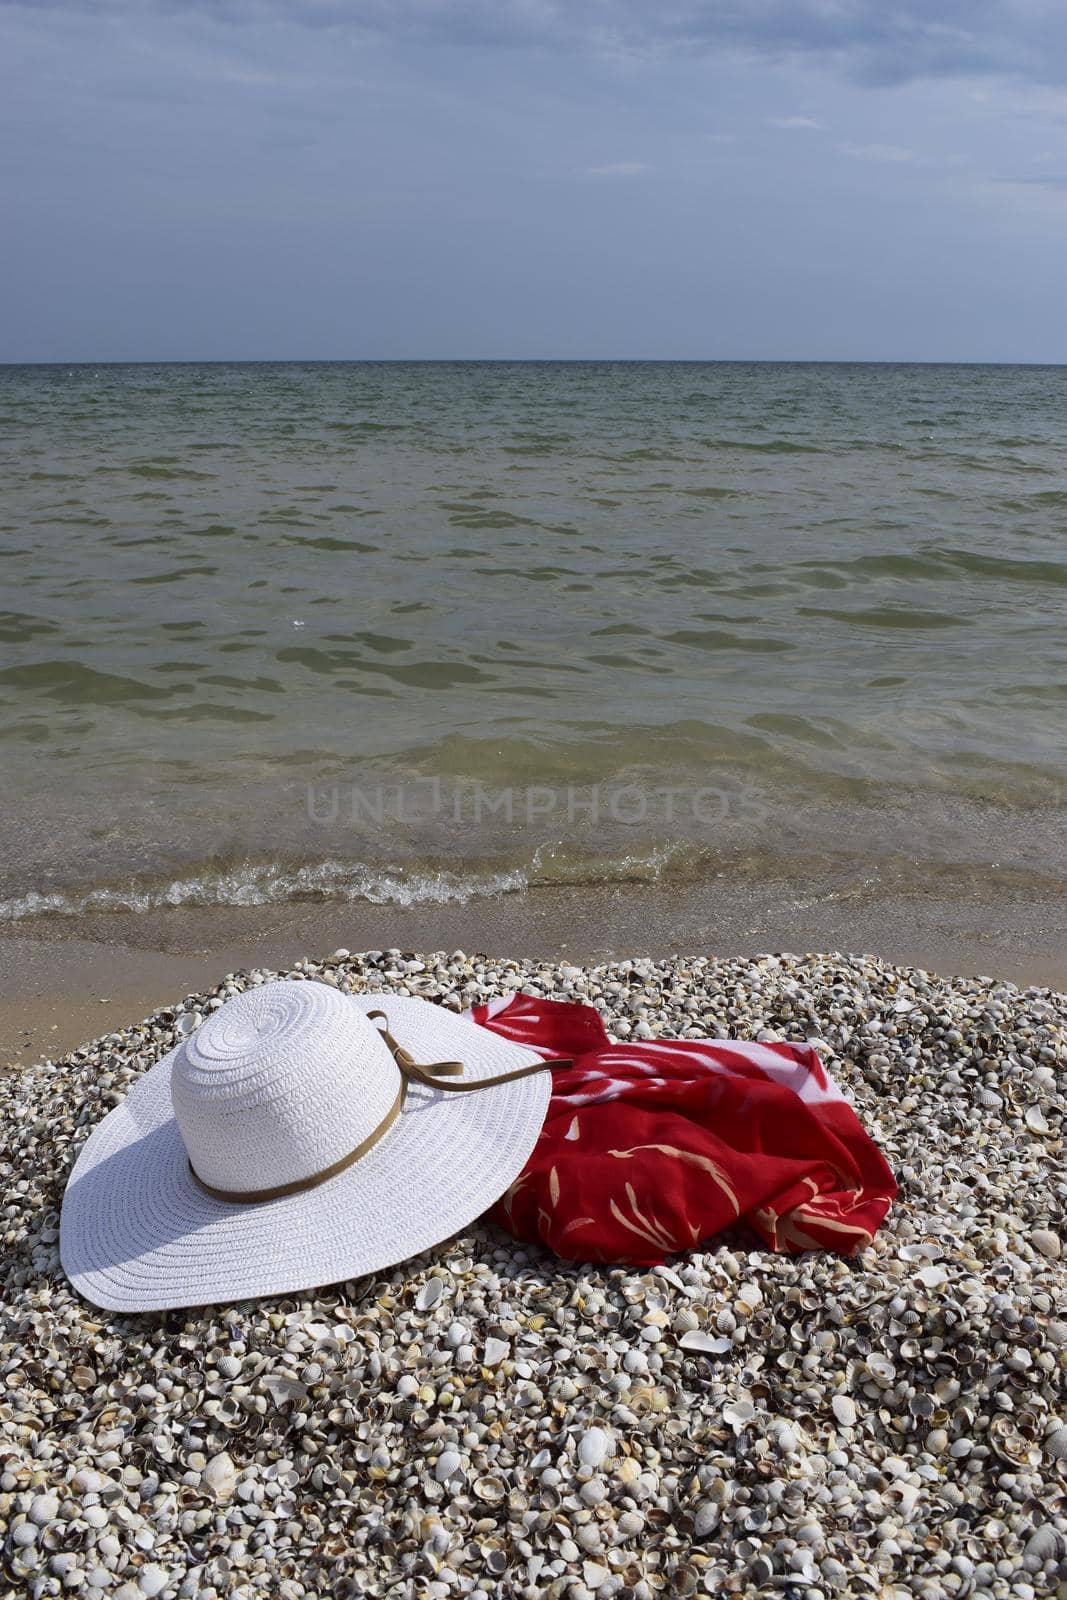 Vintage summer straw beach hat and pareo on the seashore. Accessories for relaxing on the beach. Summer lifestyle. Vacation mood.